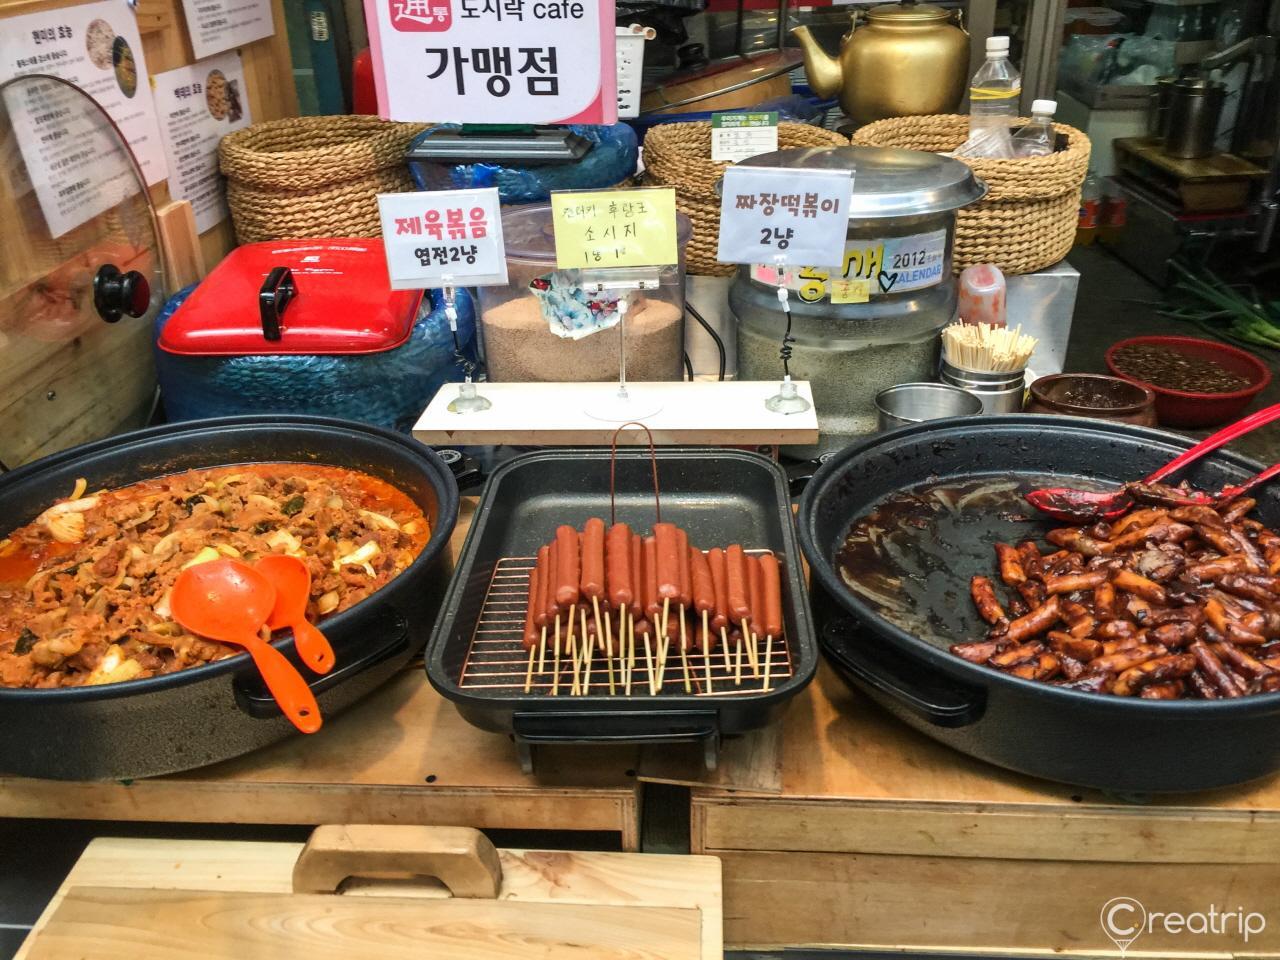 Colorful ingredients and kitchen appliances at the bustling Tongin Market in Korea, perfect for cooking up delicious Korean cuisine.